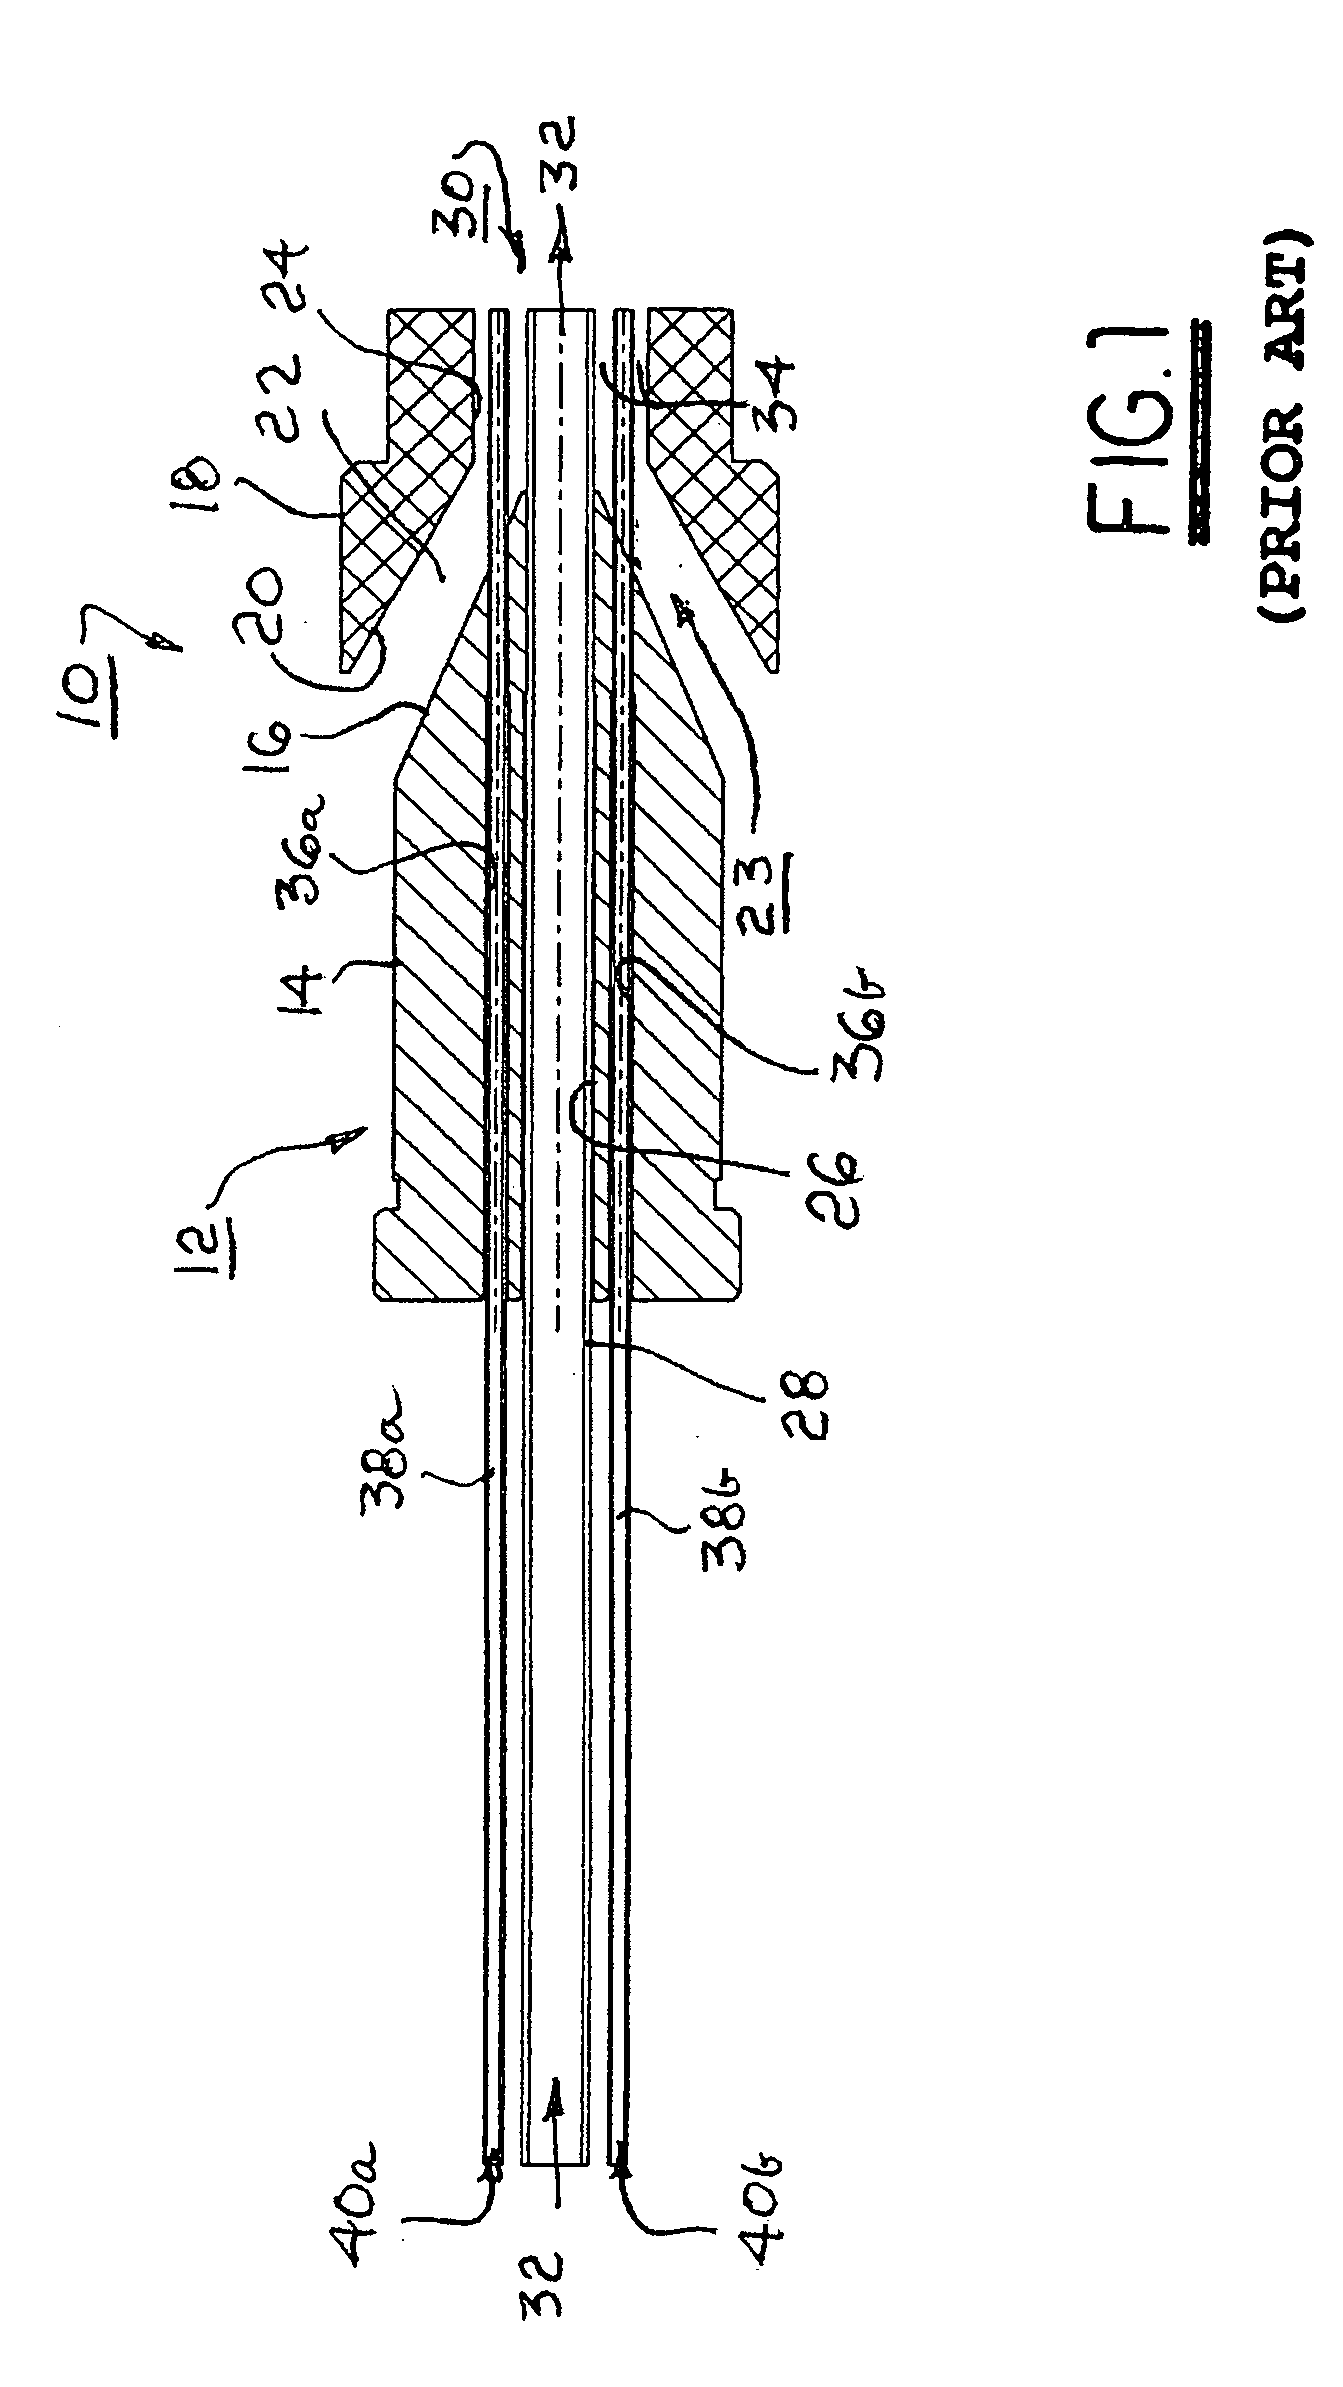 Method and apparatus for incorporating lumens into the wall of a tubular extrusion